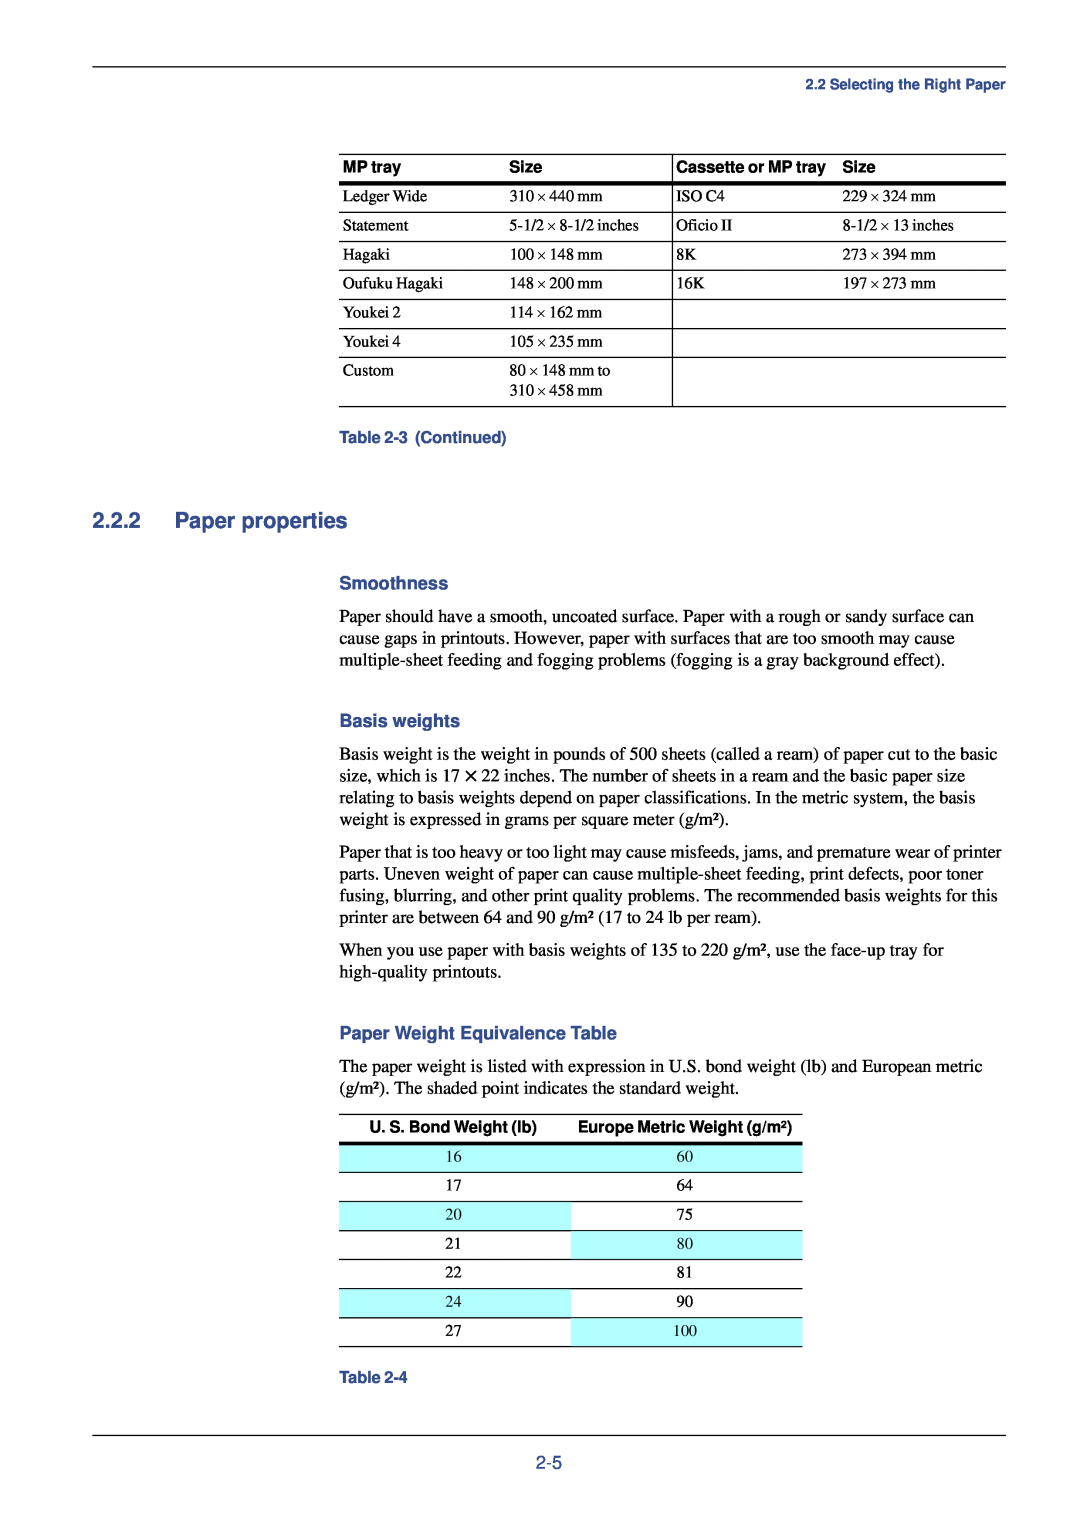 Xerox FS-C8008N, FS-C8008DN manual Paper properties, Smoothness, Basis weights, Paper Weight Equivalence Table 